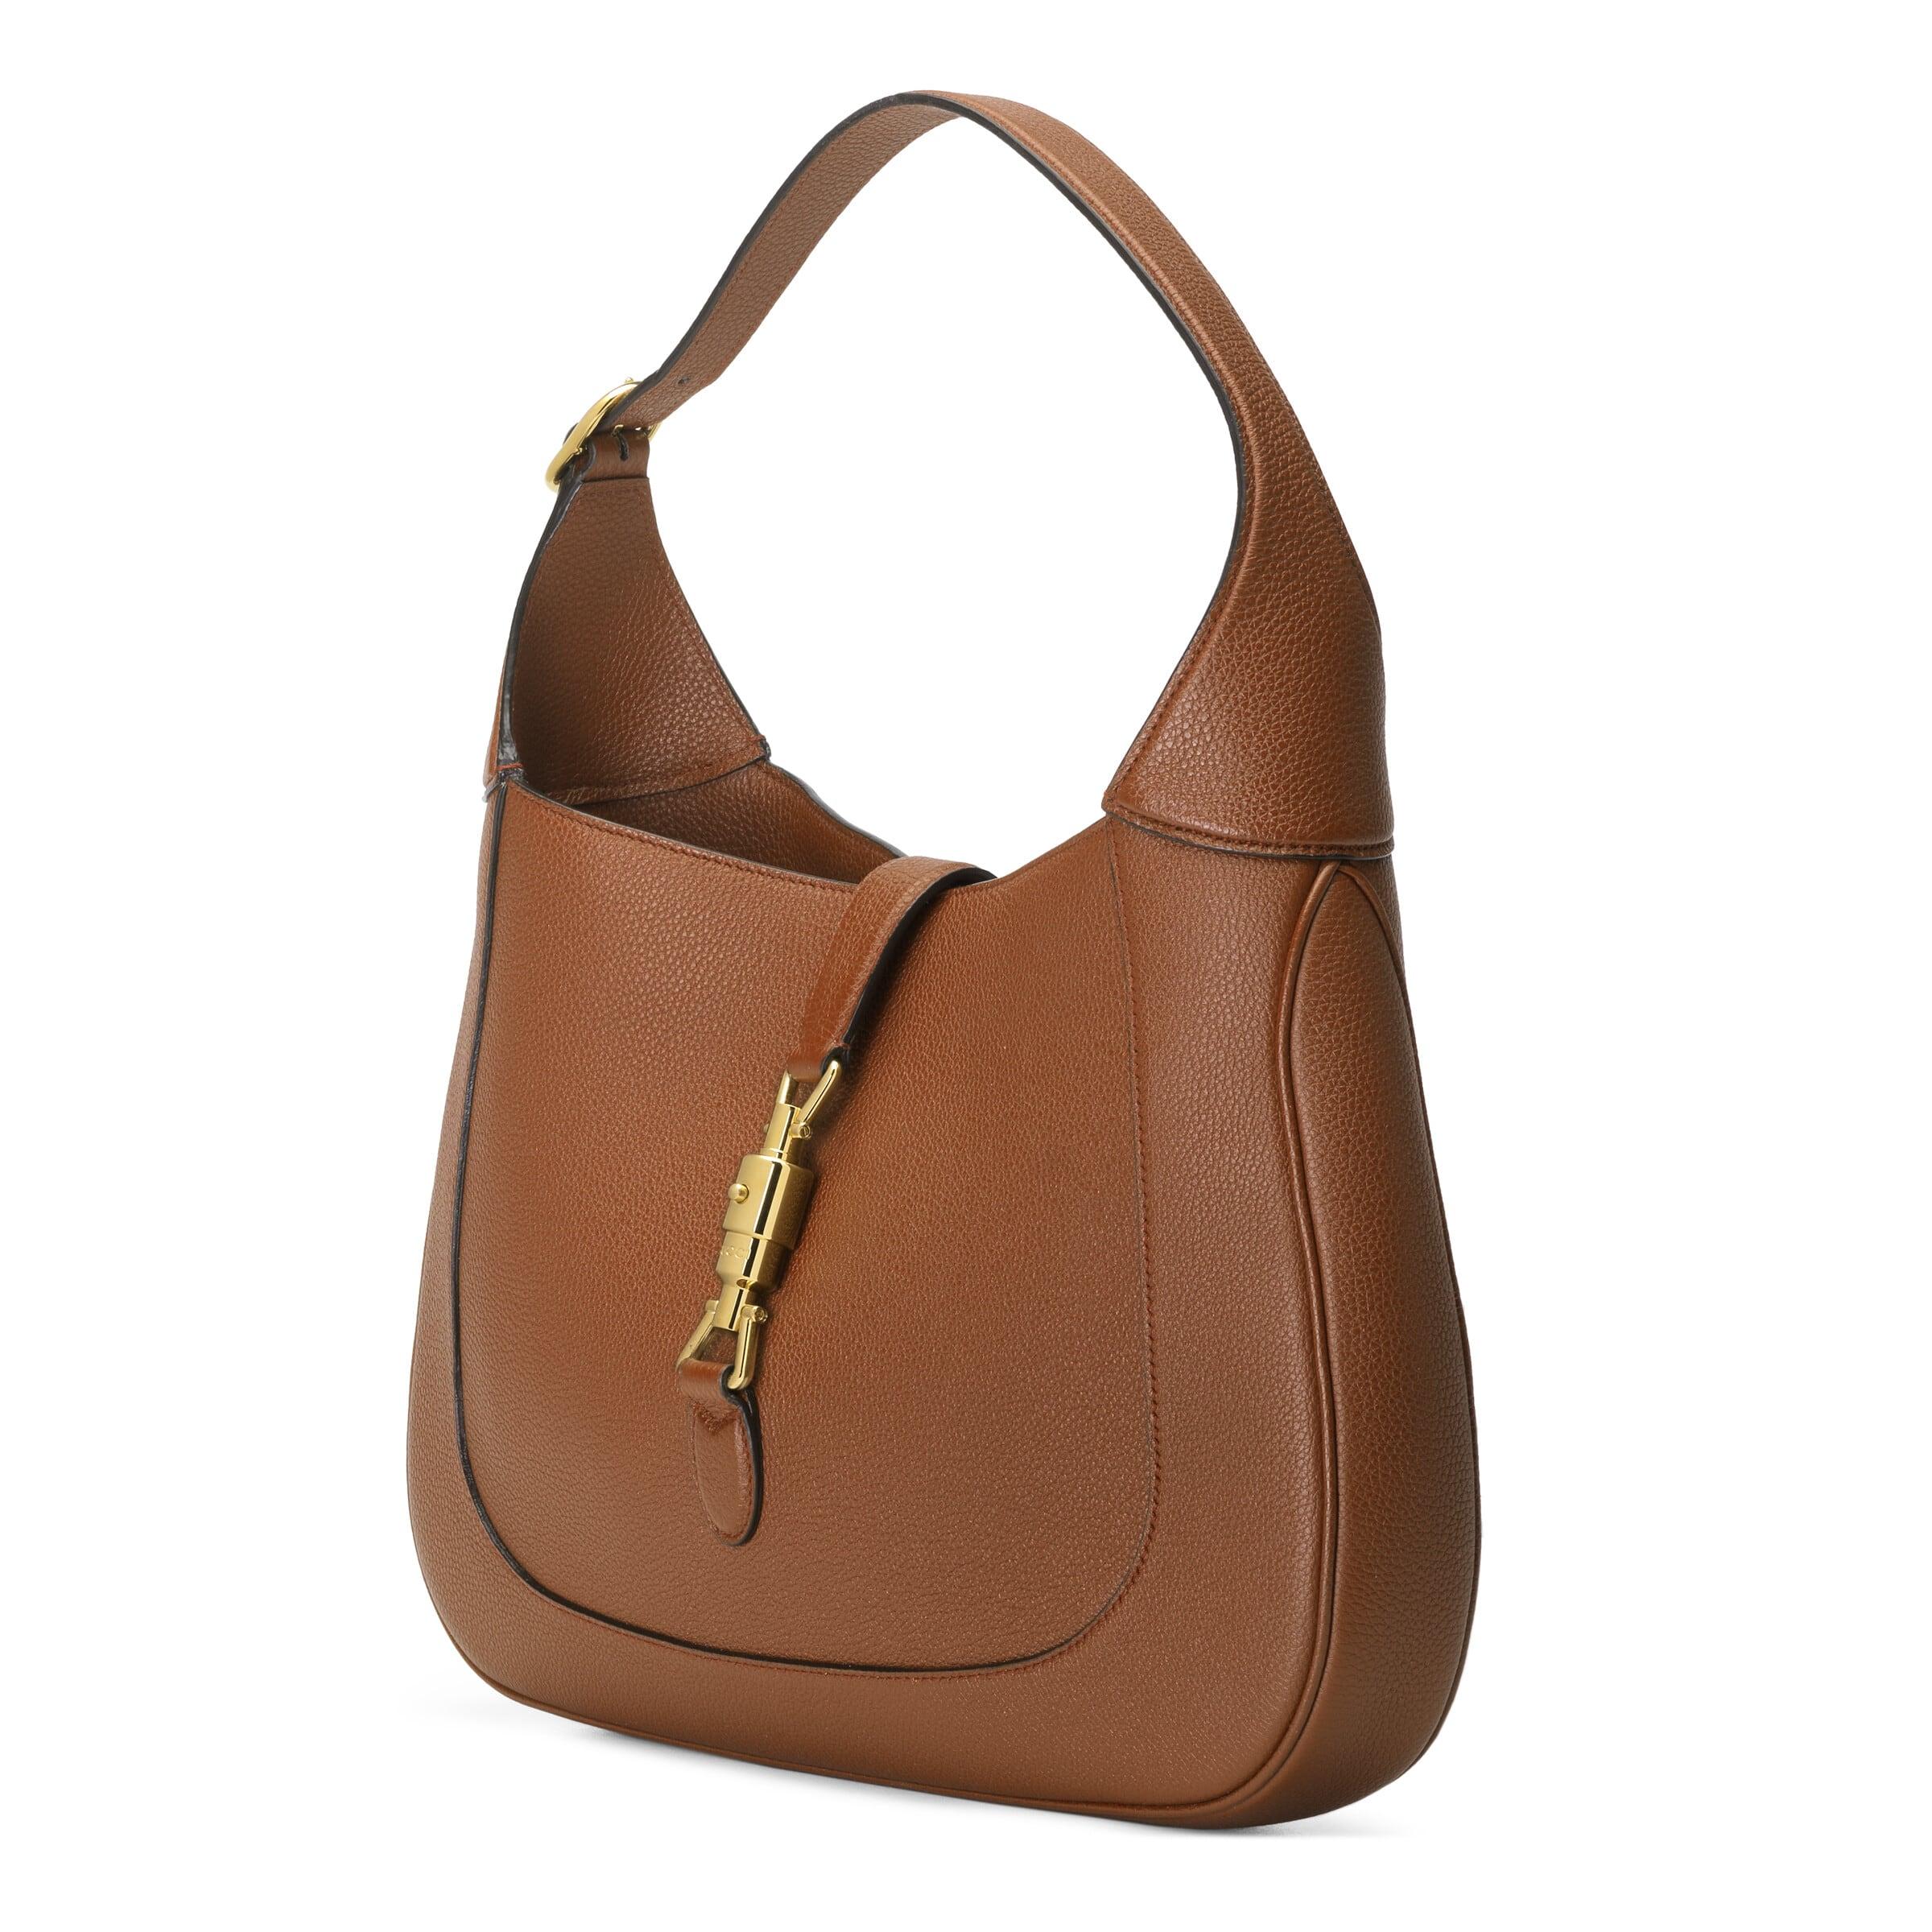 Jackie 1961 small natural grain bag in cuir brown leather